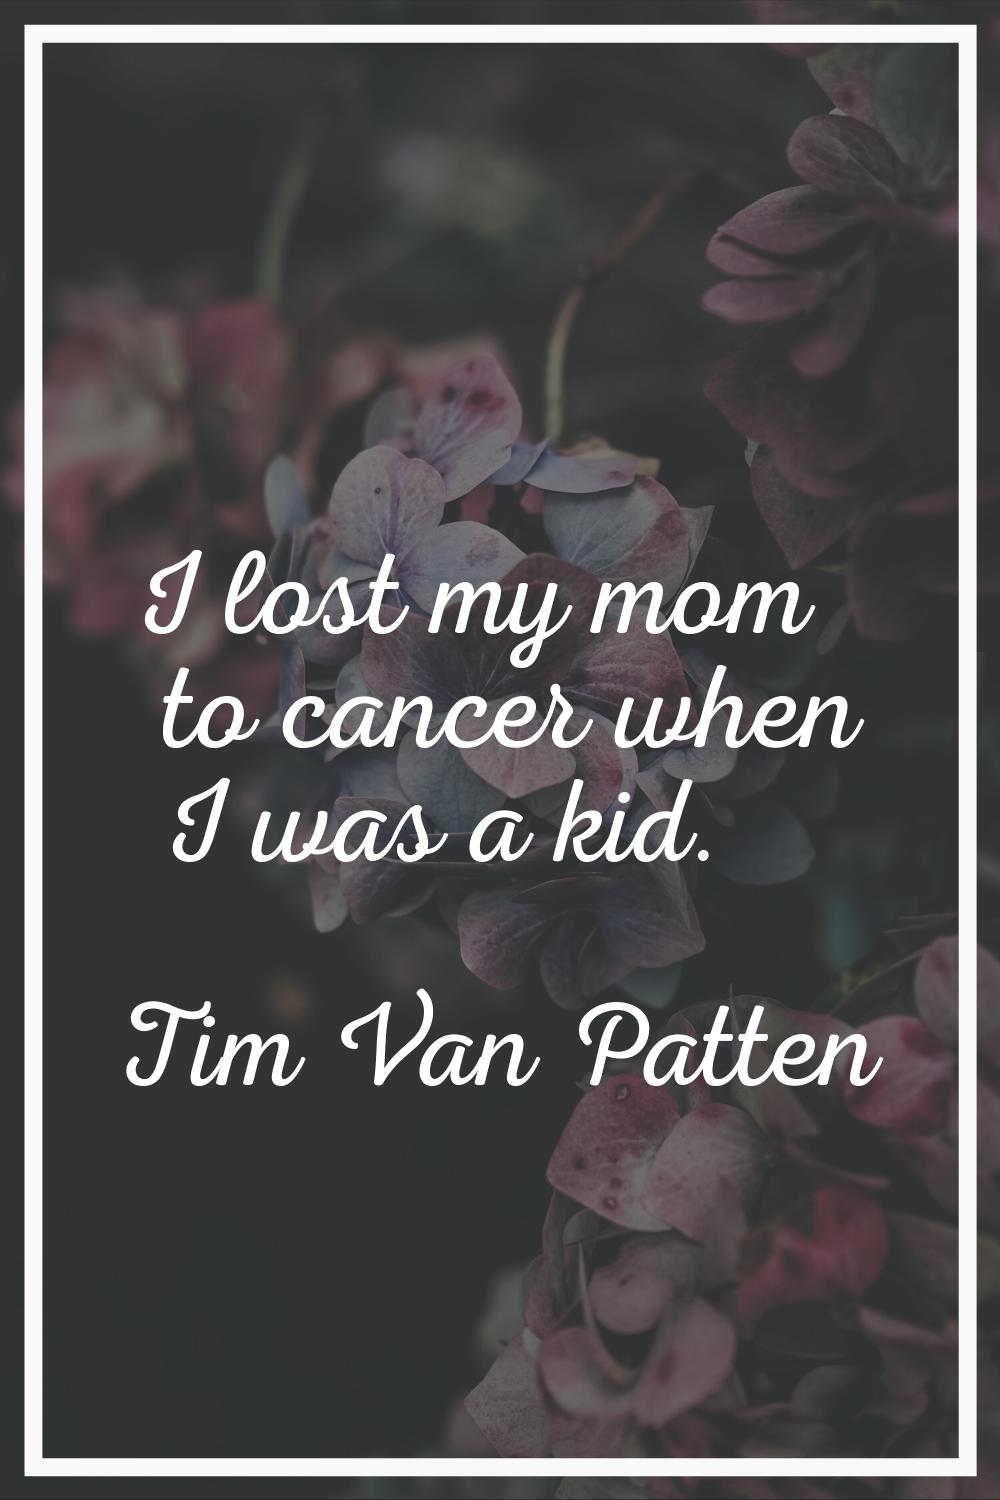 I lost my mom to cancer when I was a kid.